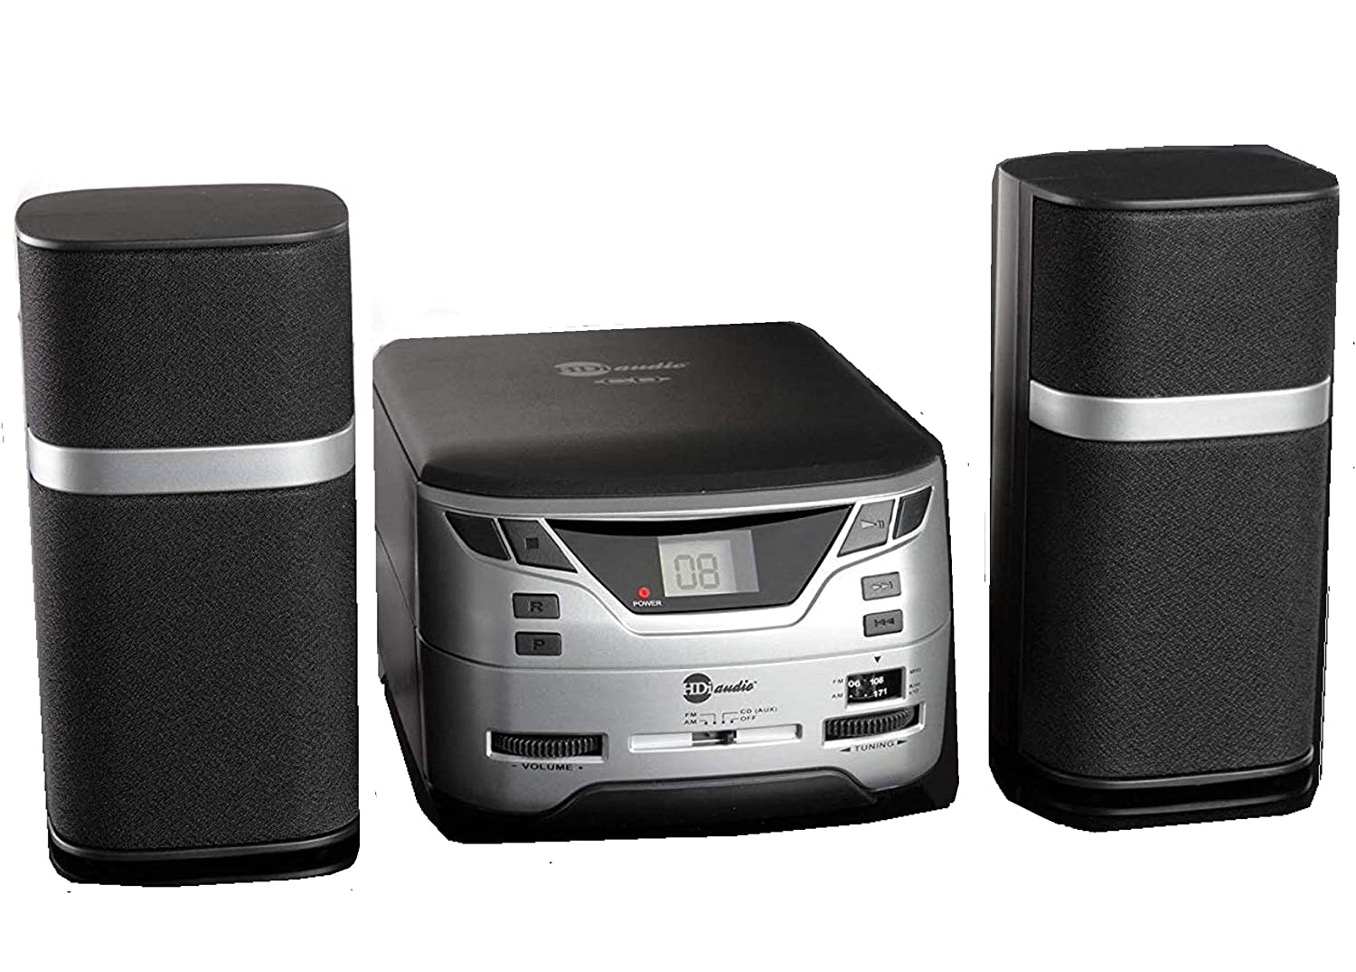 HDi Audio CD-526 Home Stereo System